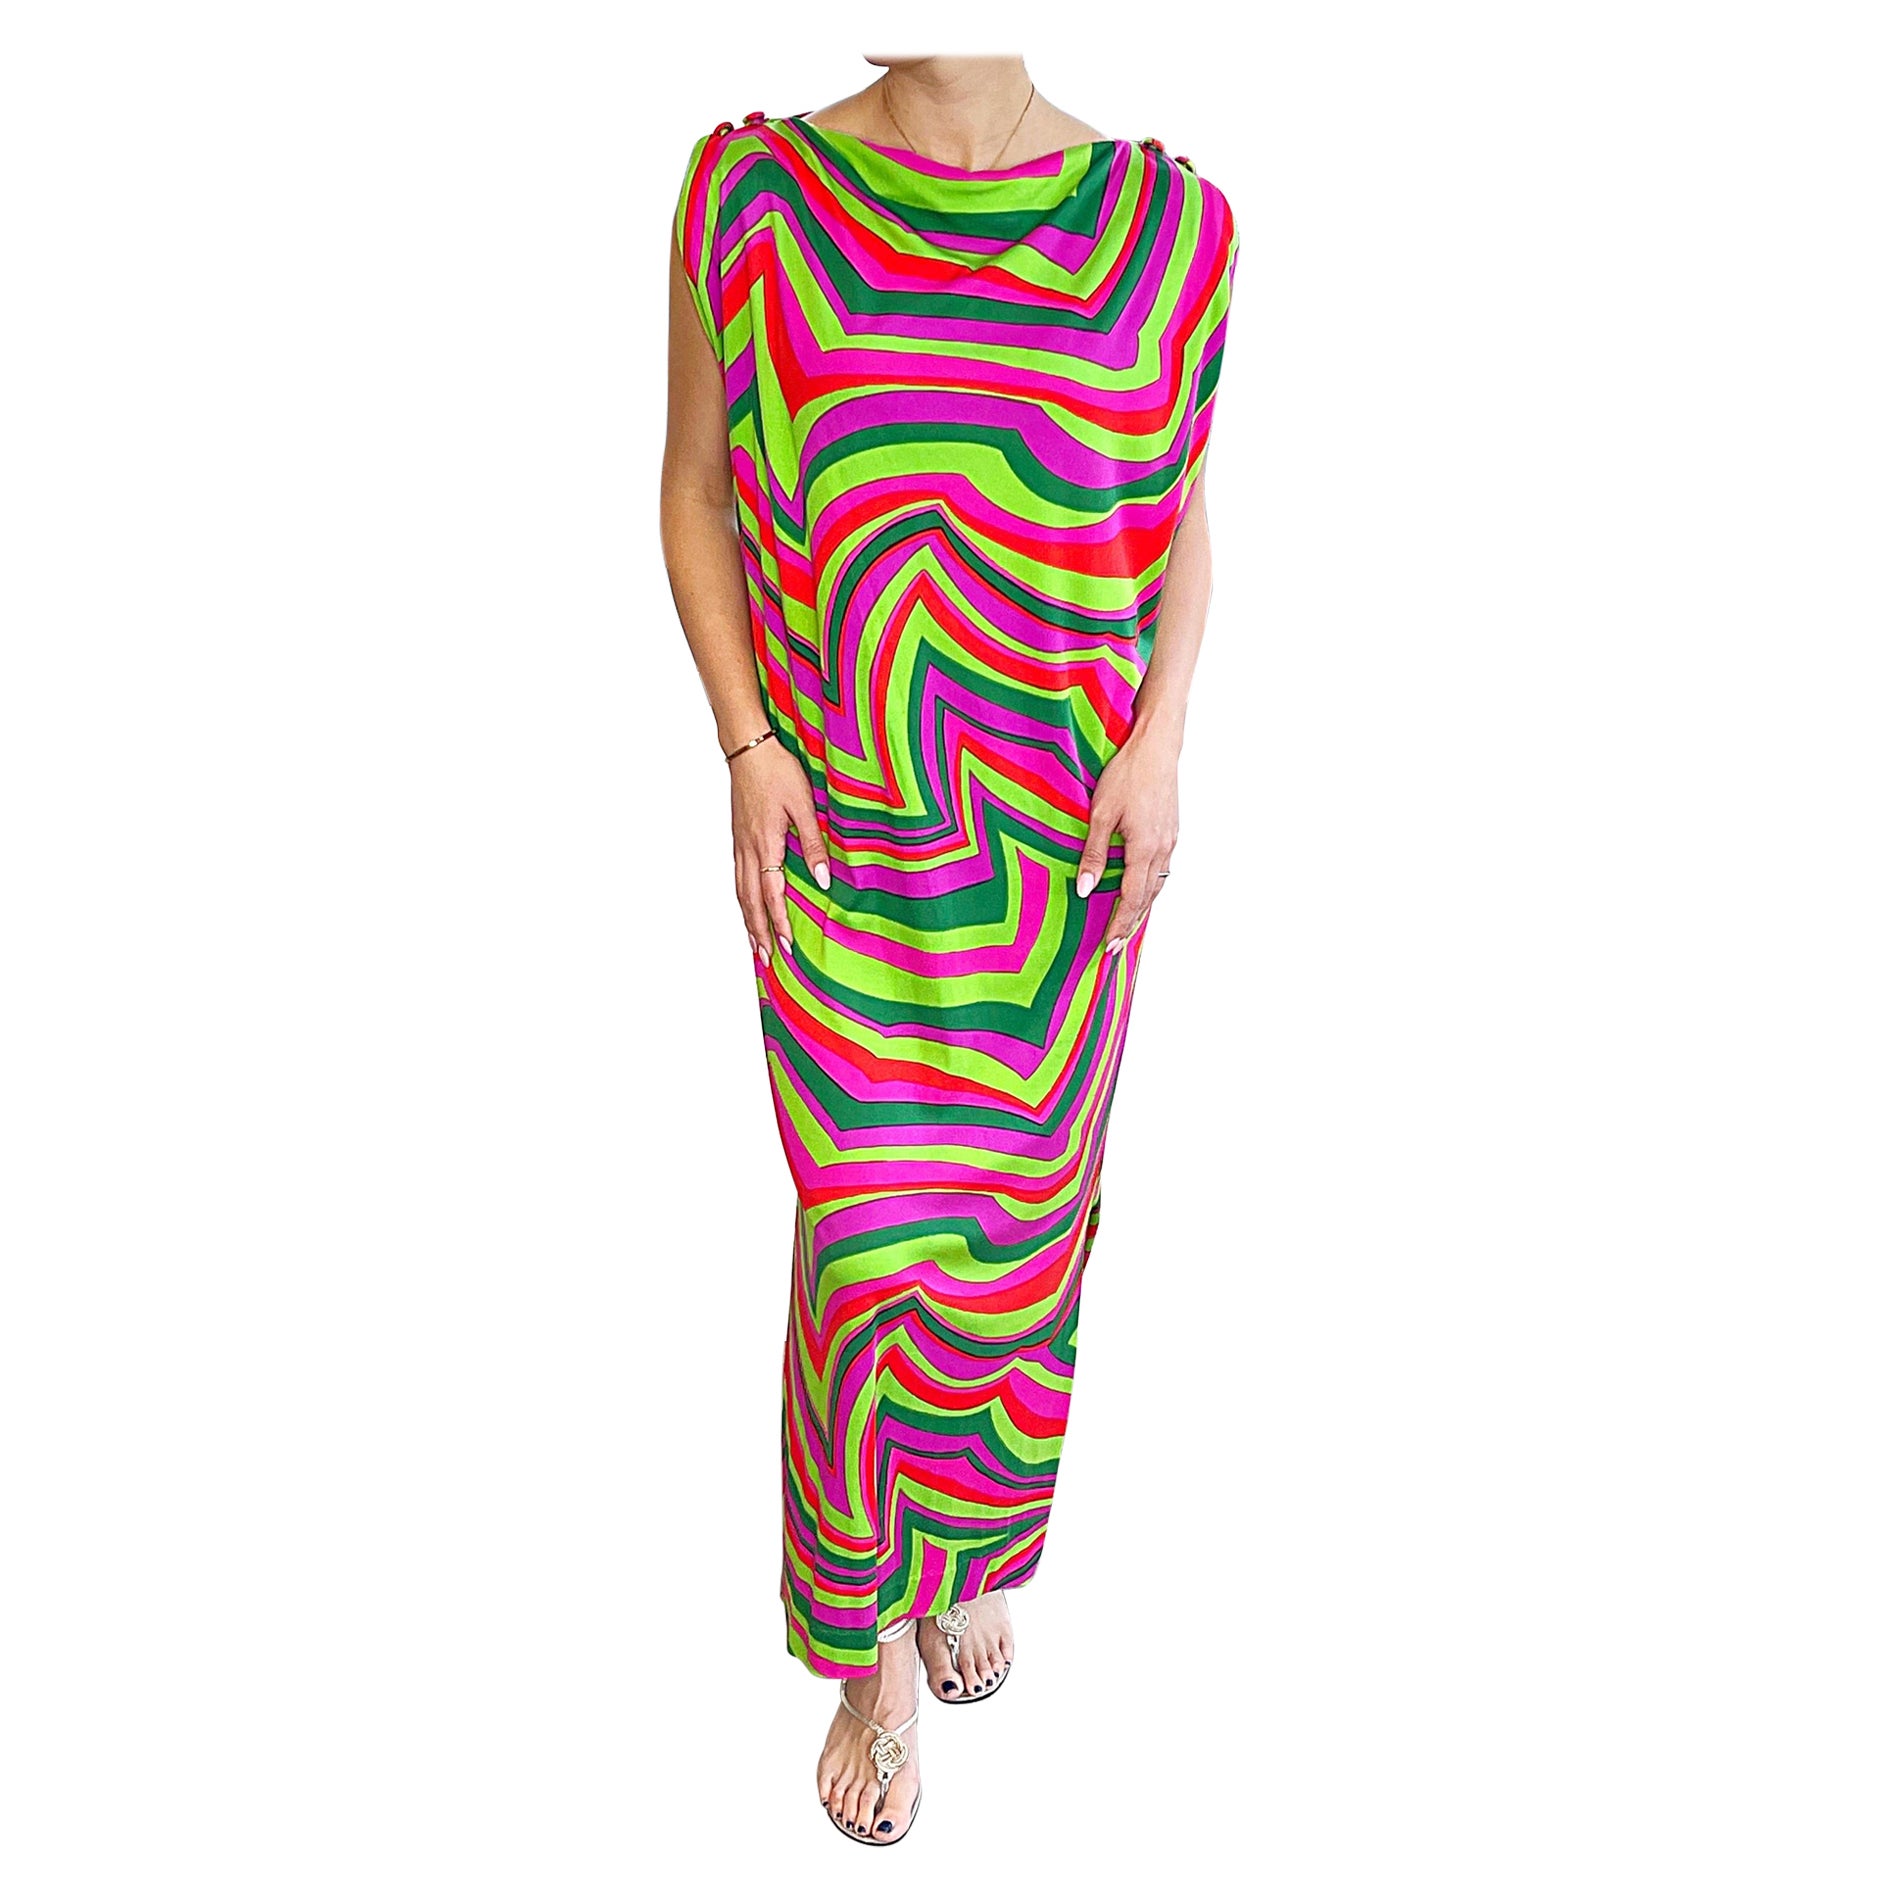 Amazing 1970s Pucci Style Colorful Pink Green Jersey Vintage Caftan Maxi Dress